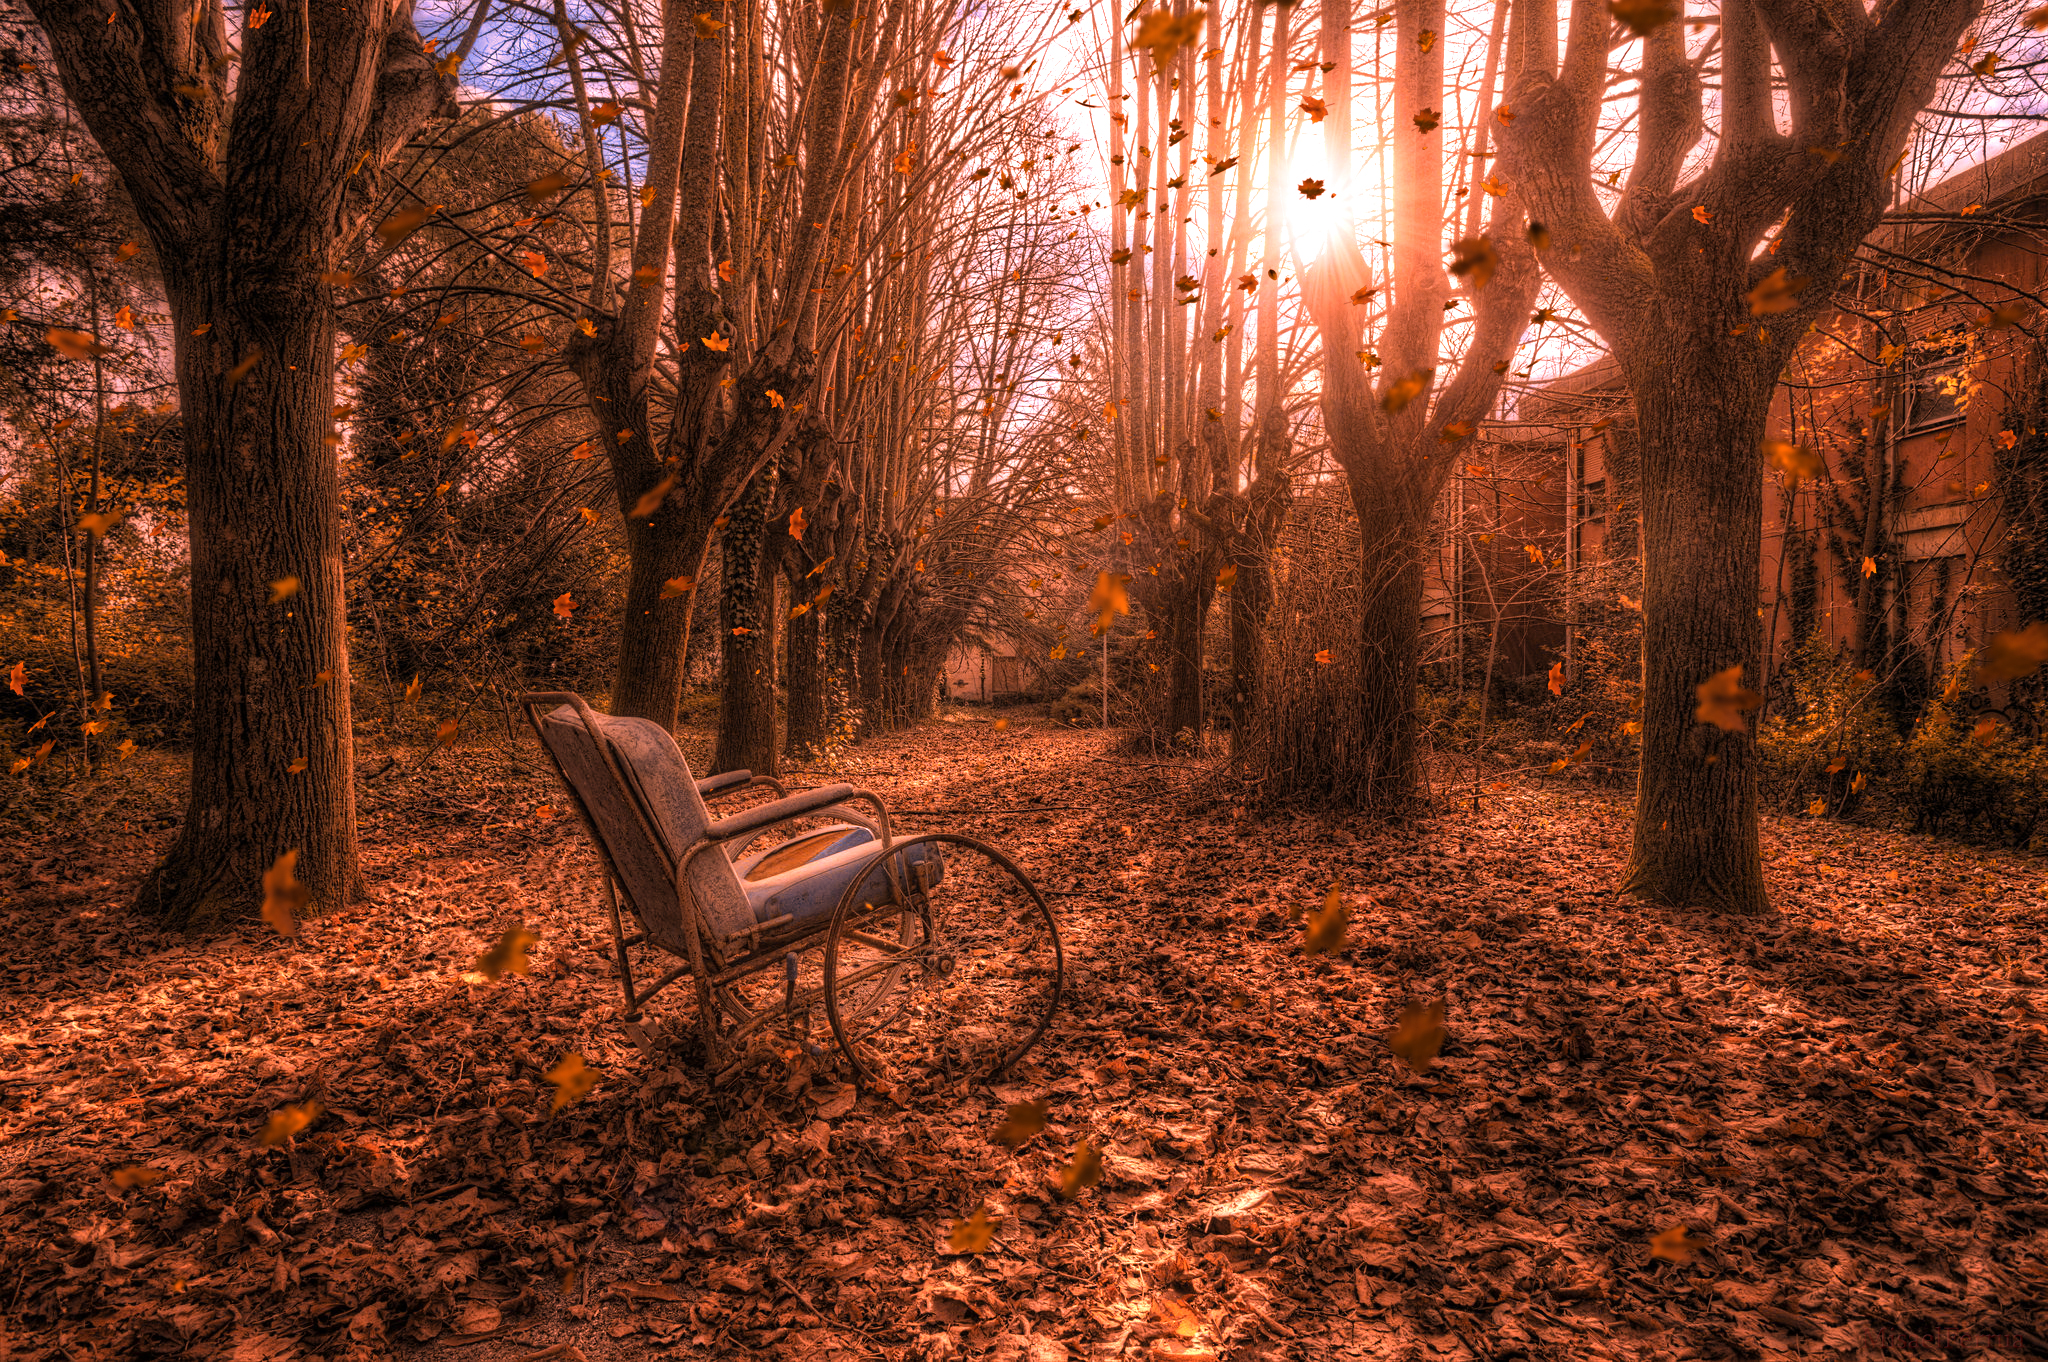 General 2048x1362 trees sunlight outdoors chair fall leaves wind